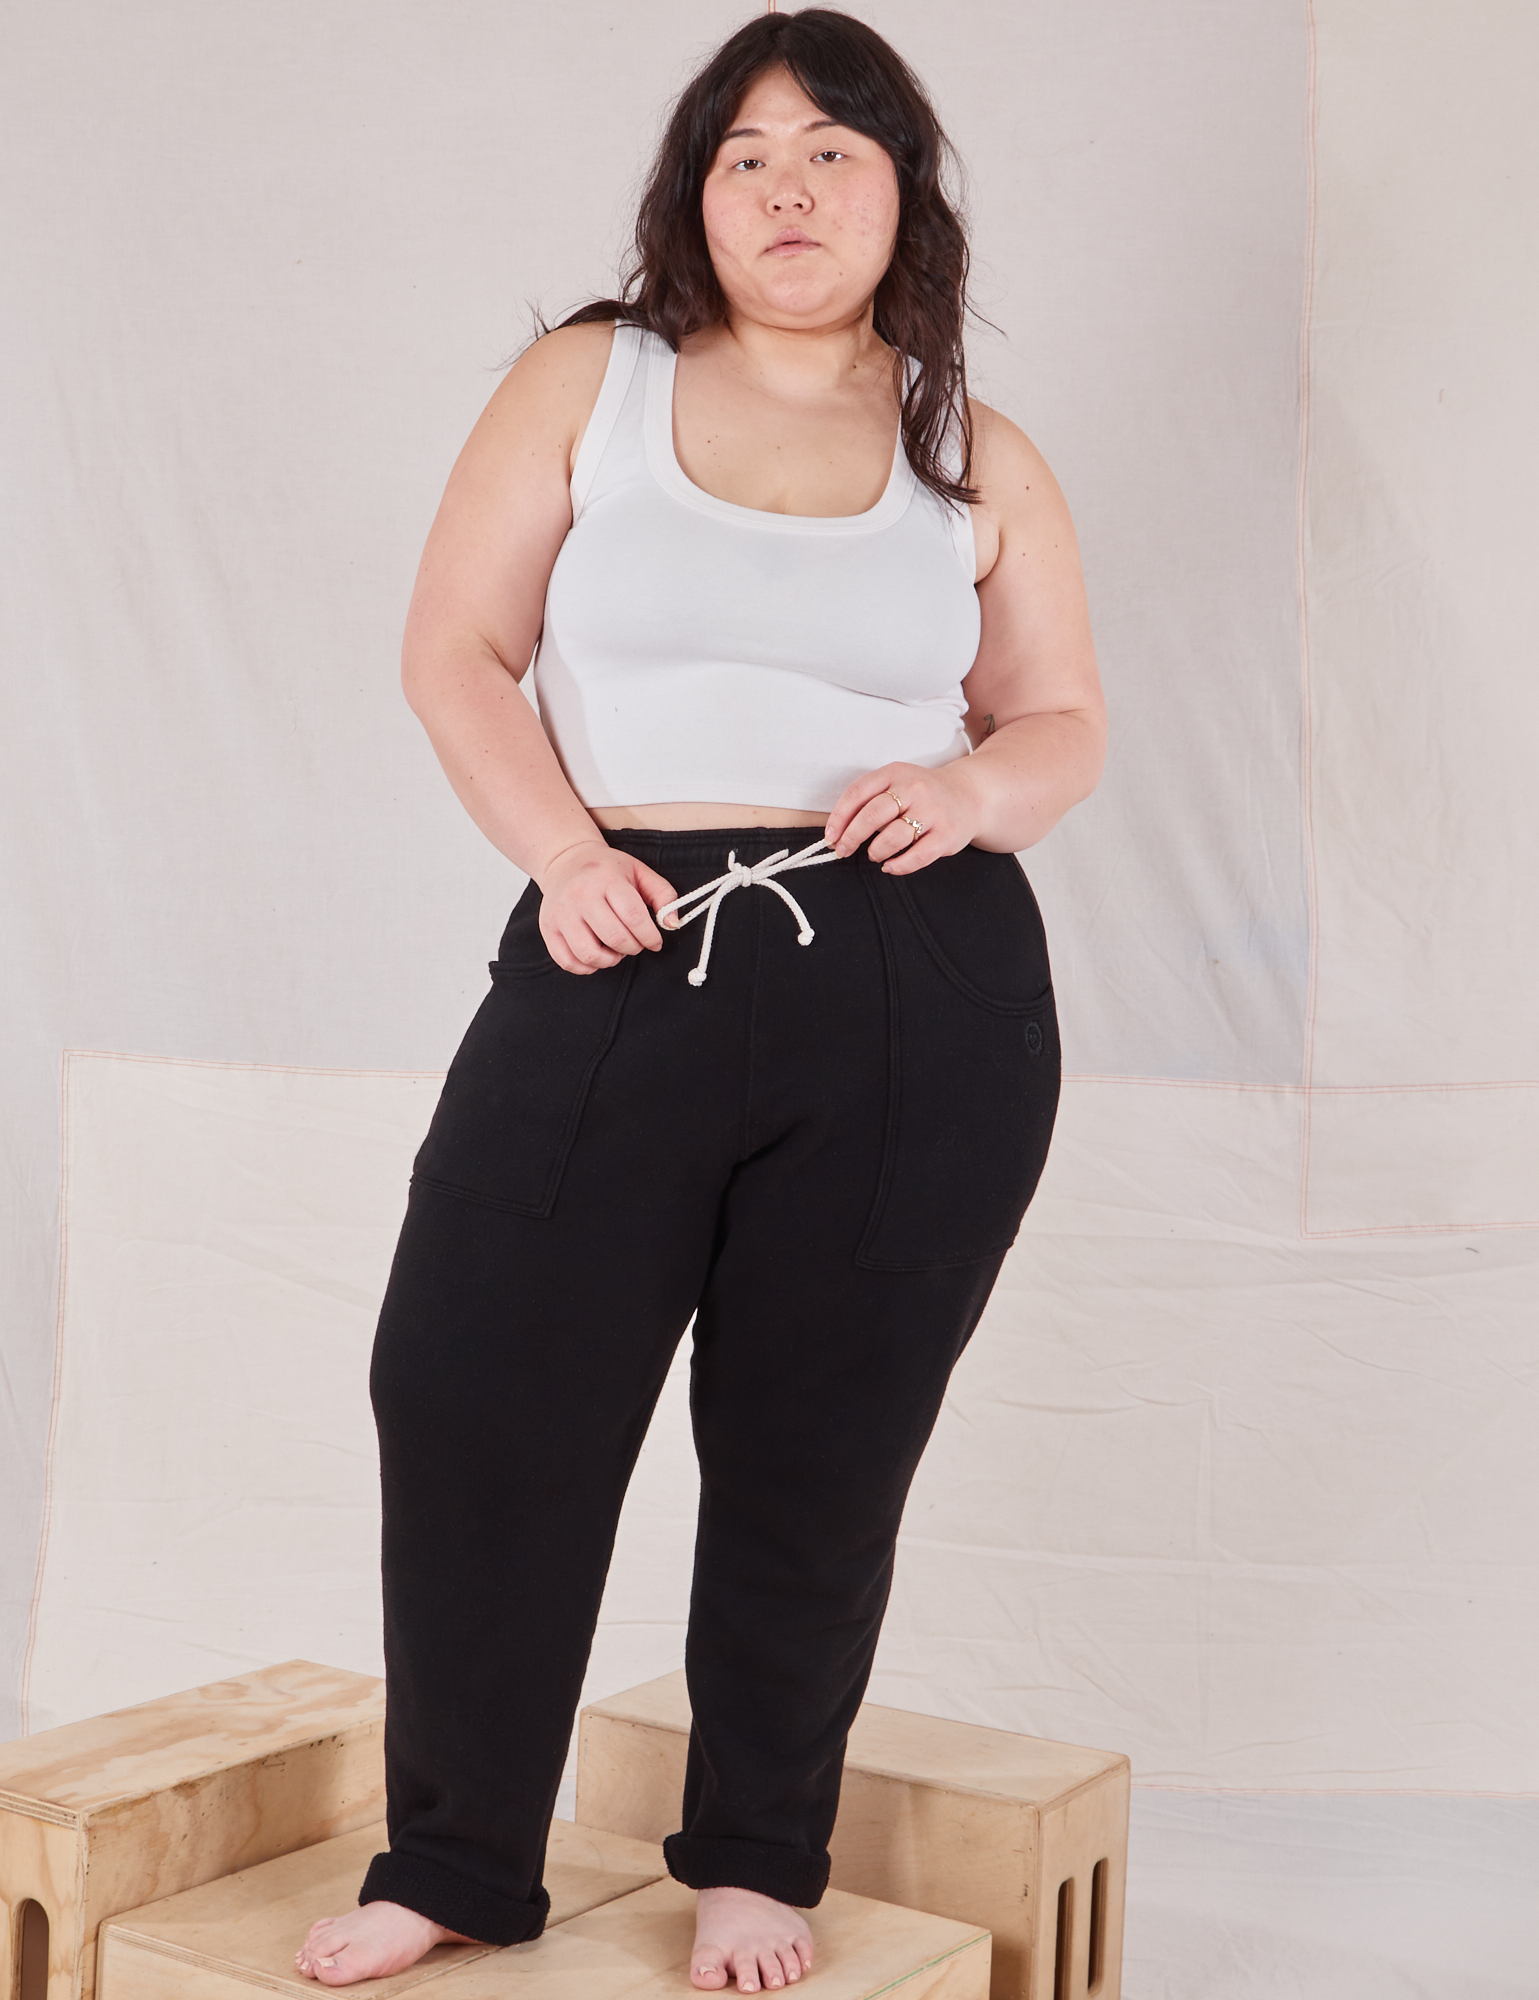 Ashley is 5&#39;7&quot; and wearing L Rolled Cuff Sweat Pants in Basic Black paired with vintage off-white Cropped Tank